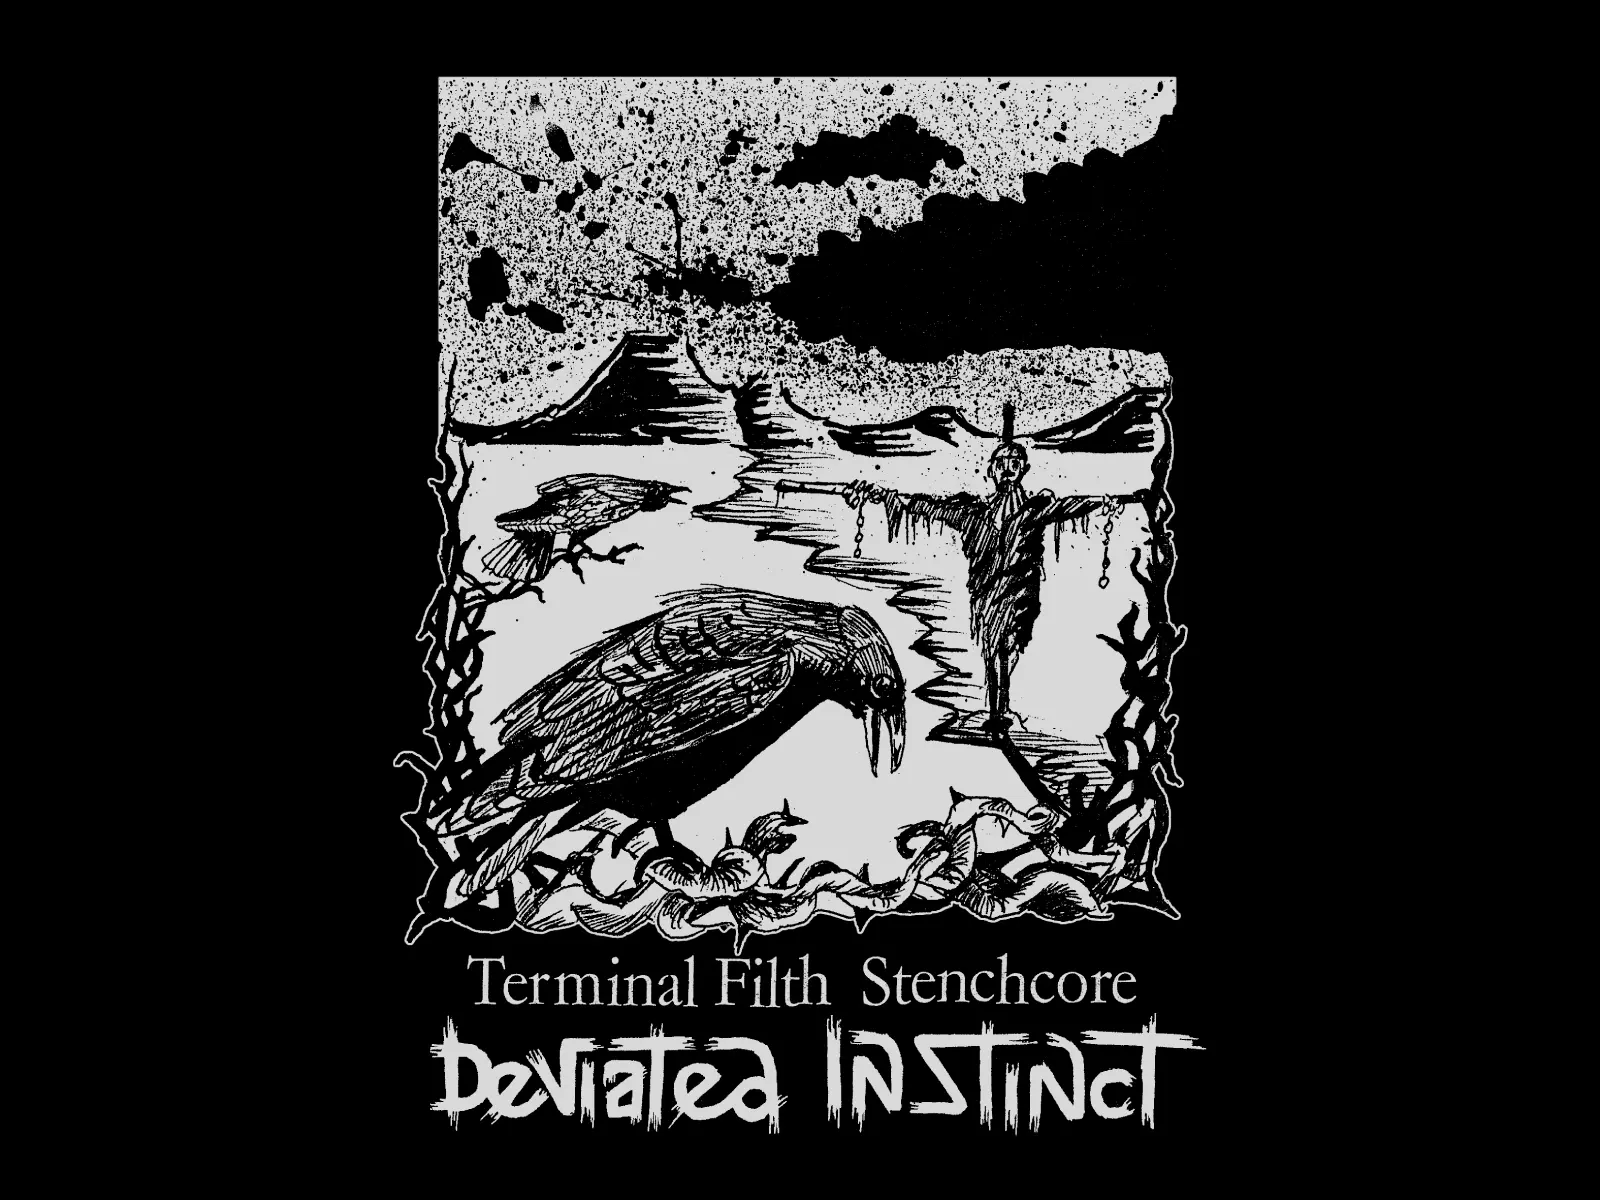 Terminal Filth Stenchcore backpatch